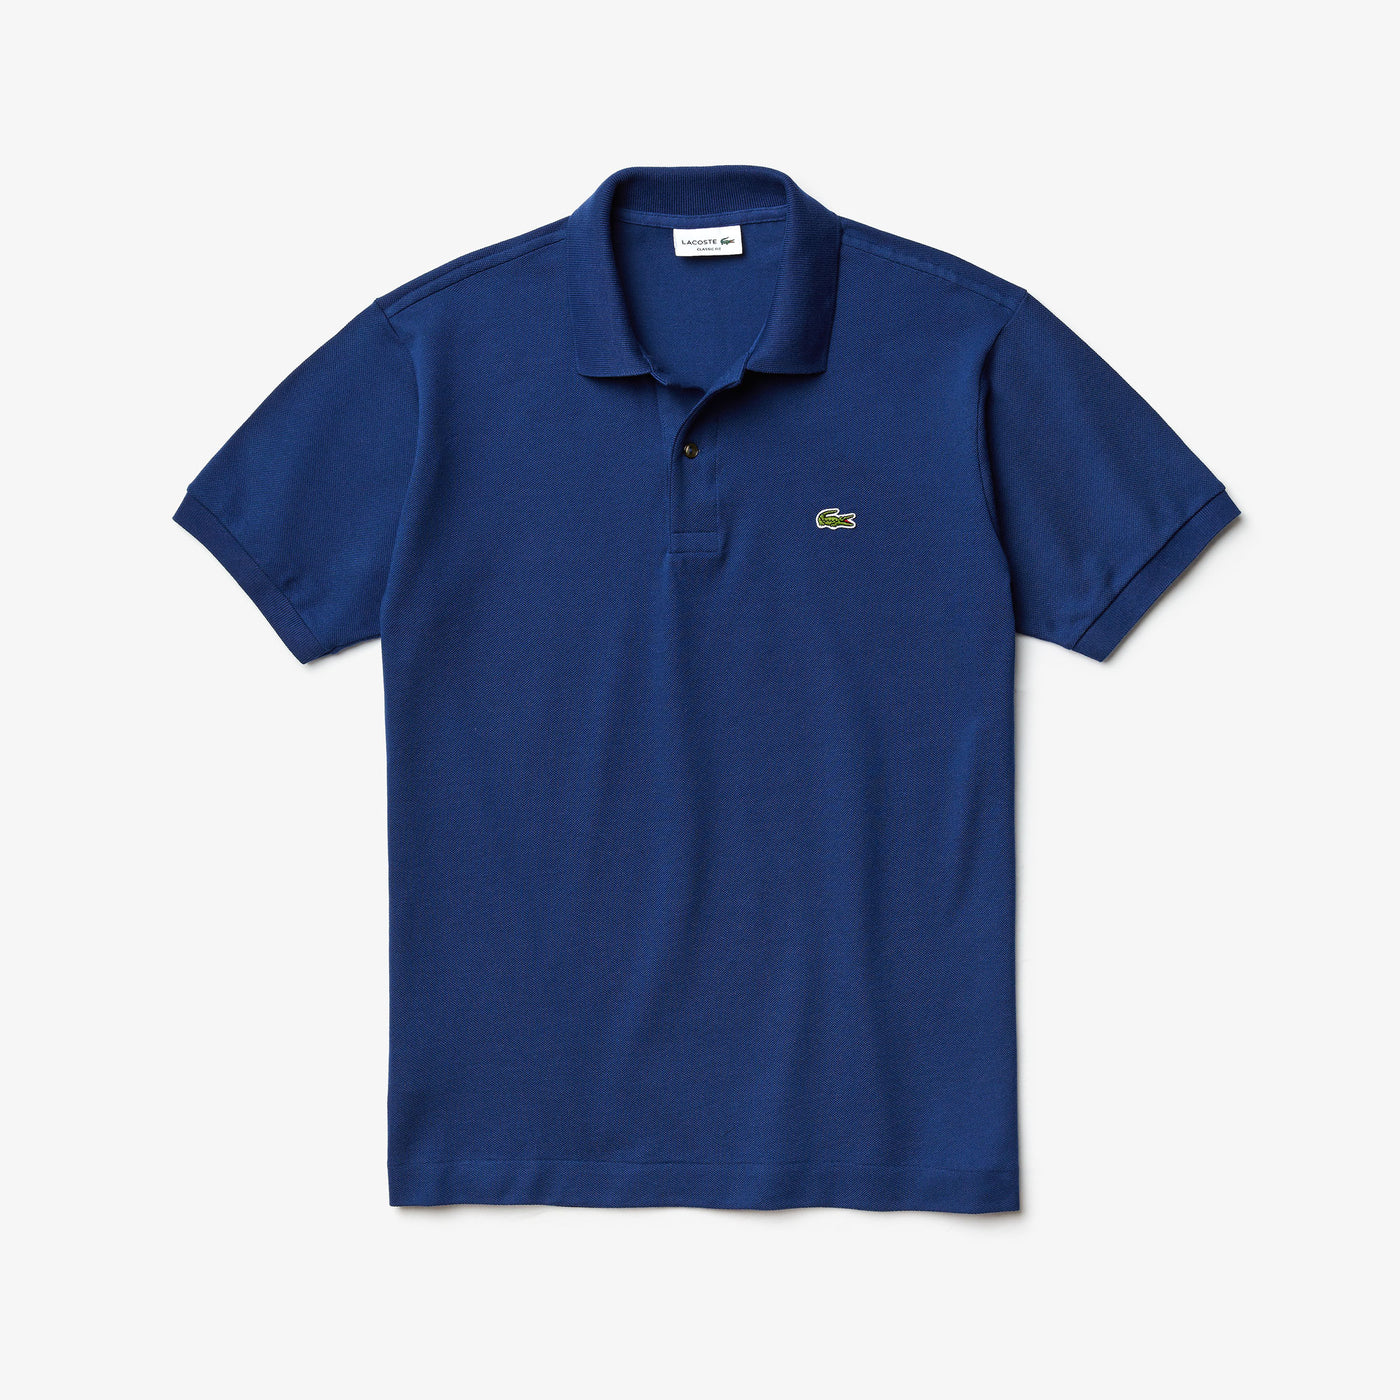 LACOSTE CLASSIC FIT L.12.12 POLO SHIRT - PERSONALIZABLE-L1212 - myHoldal